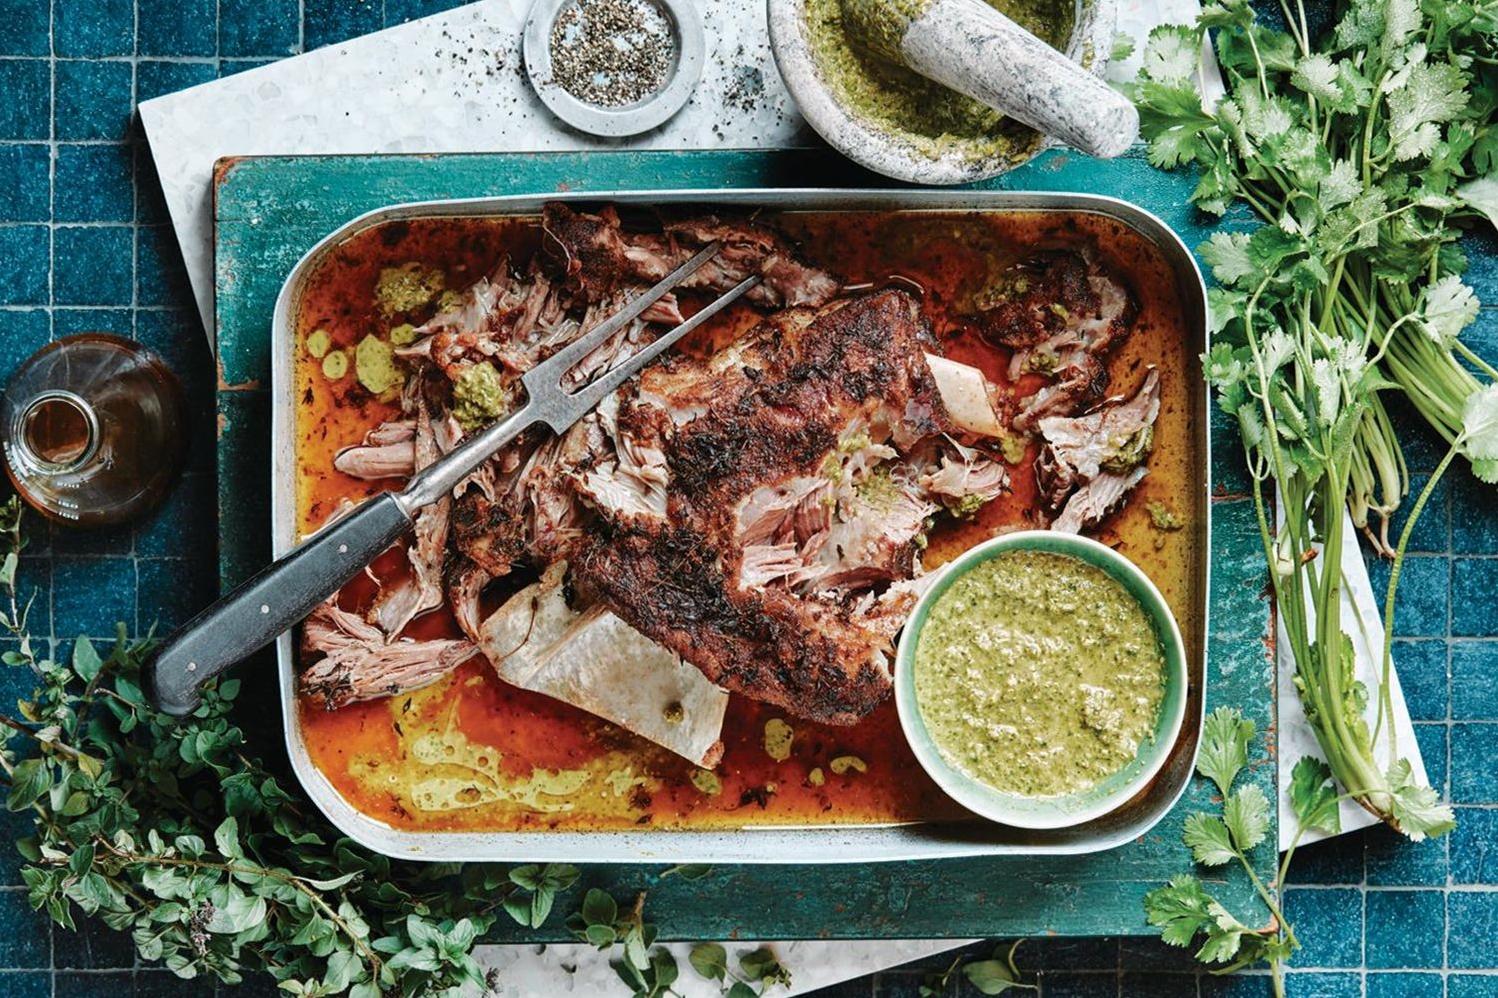  The comforting aroma of slow-cooked lamb filling up your kitchen